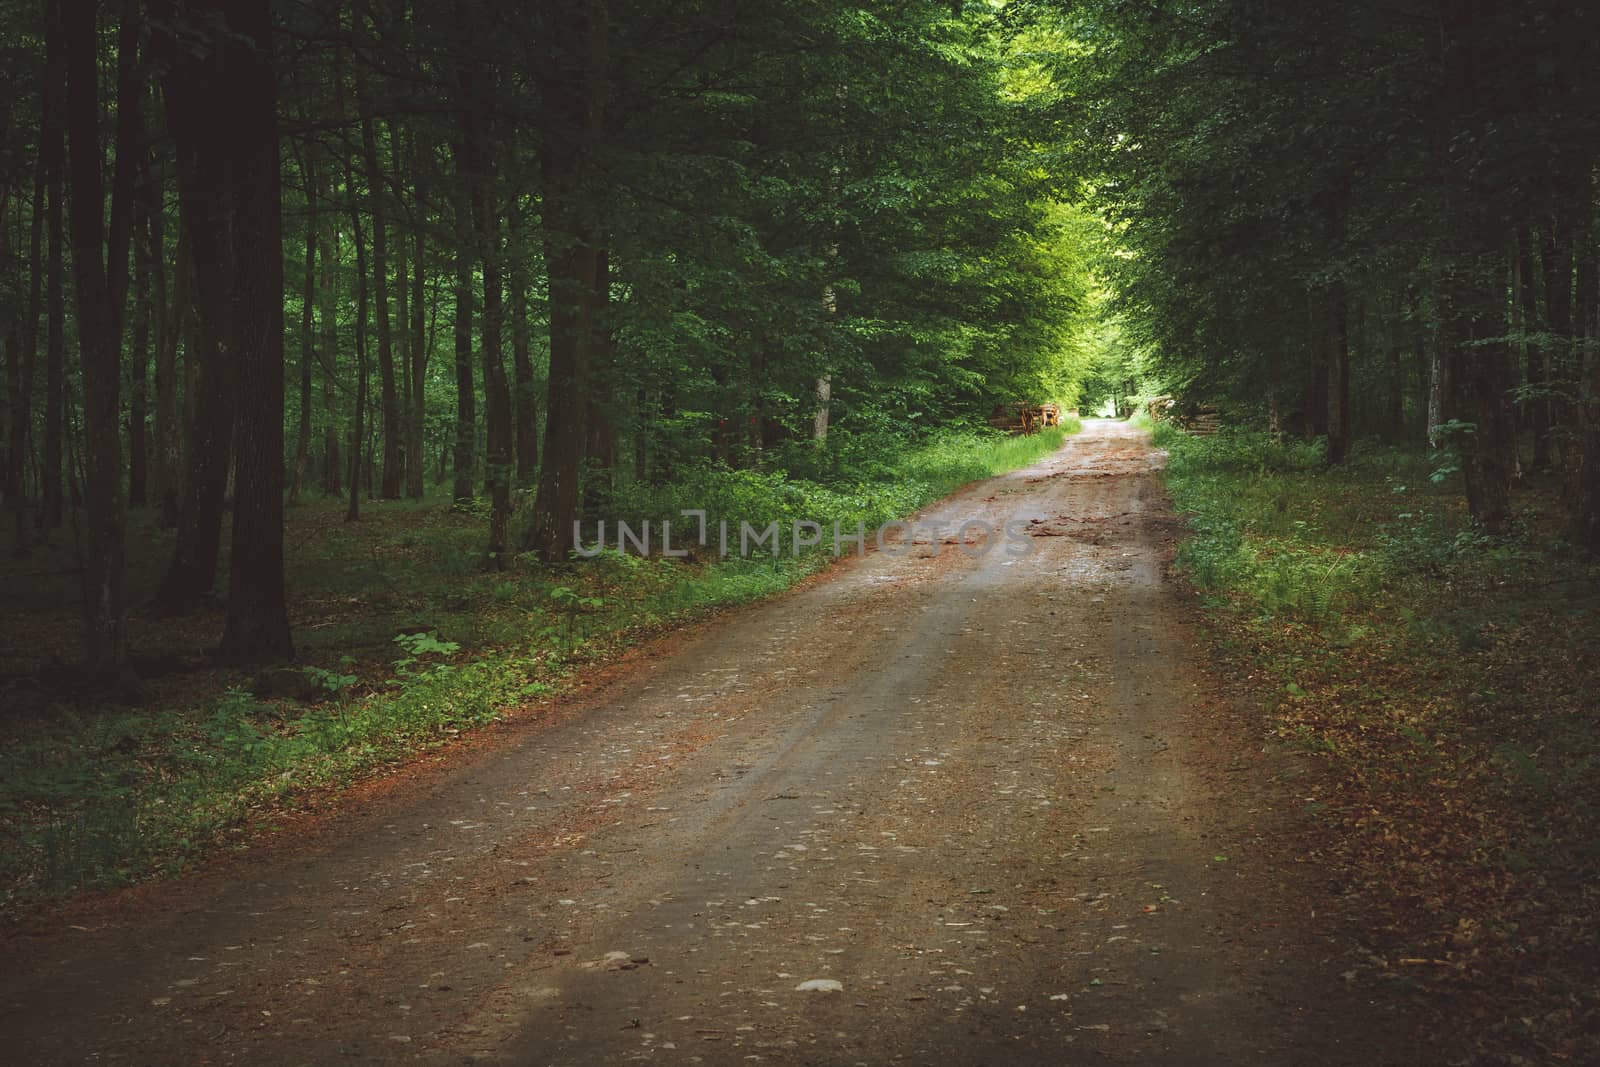 A road in a mysterious forest, Landscape Park, Nowiny, Poland by darekb22